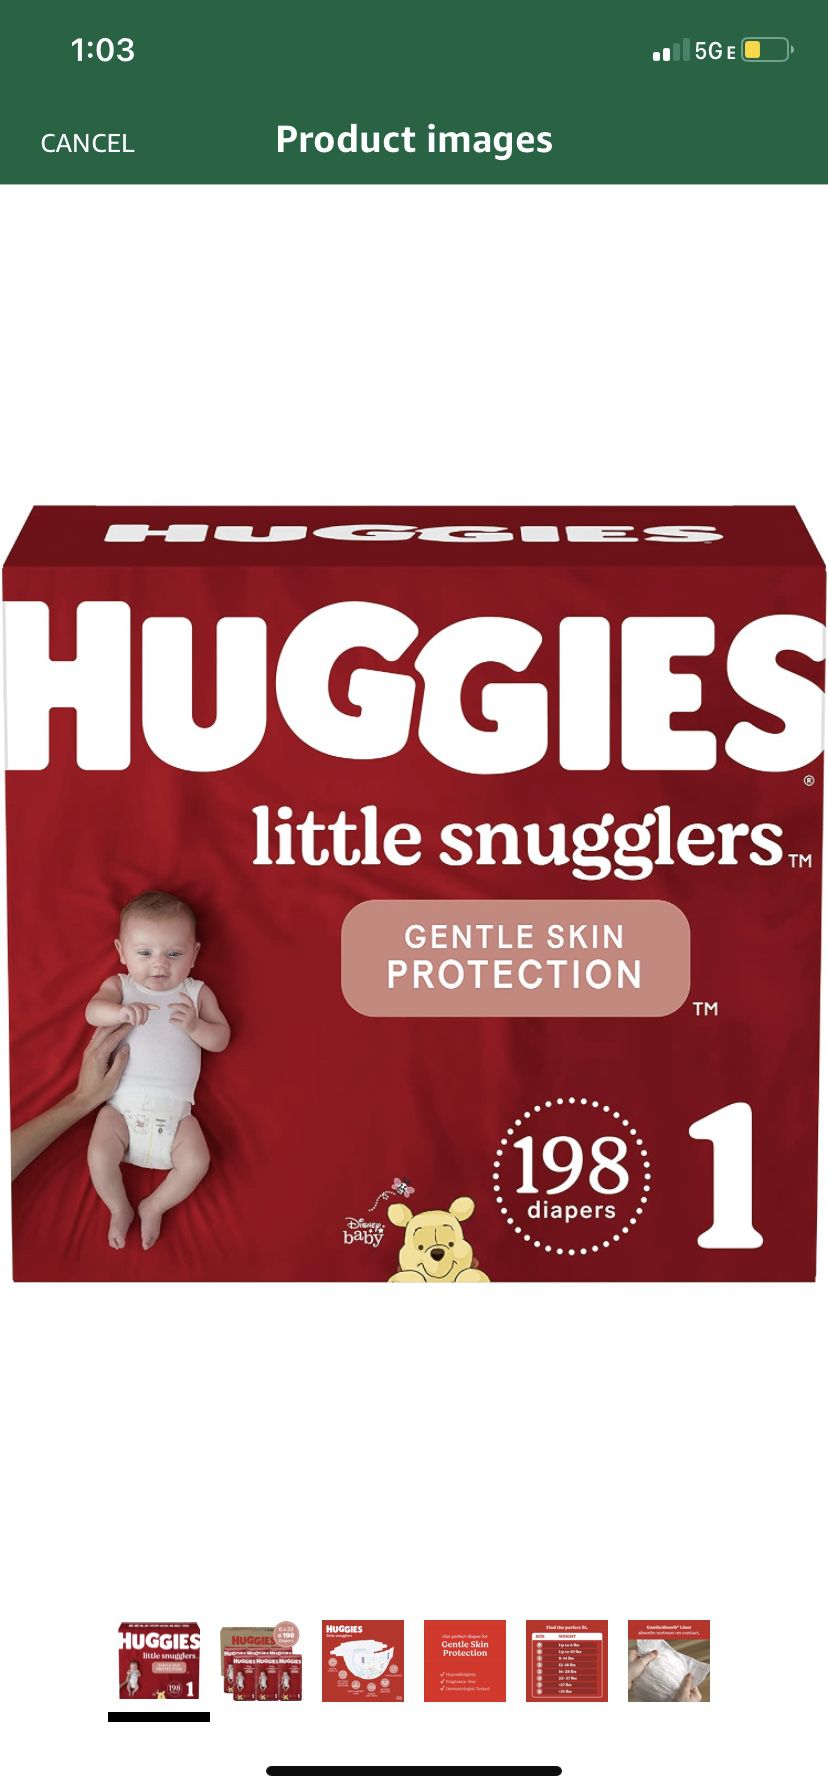 Baby Diapers Size 1 (8-14 lbs), 198ct, Huggies Little Snugglers Newborn Diapers